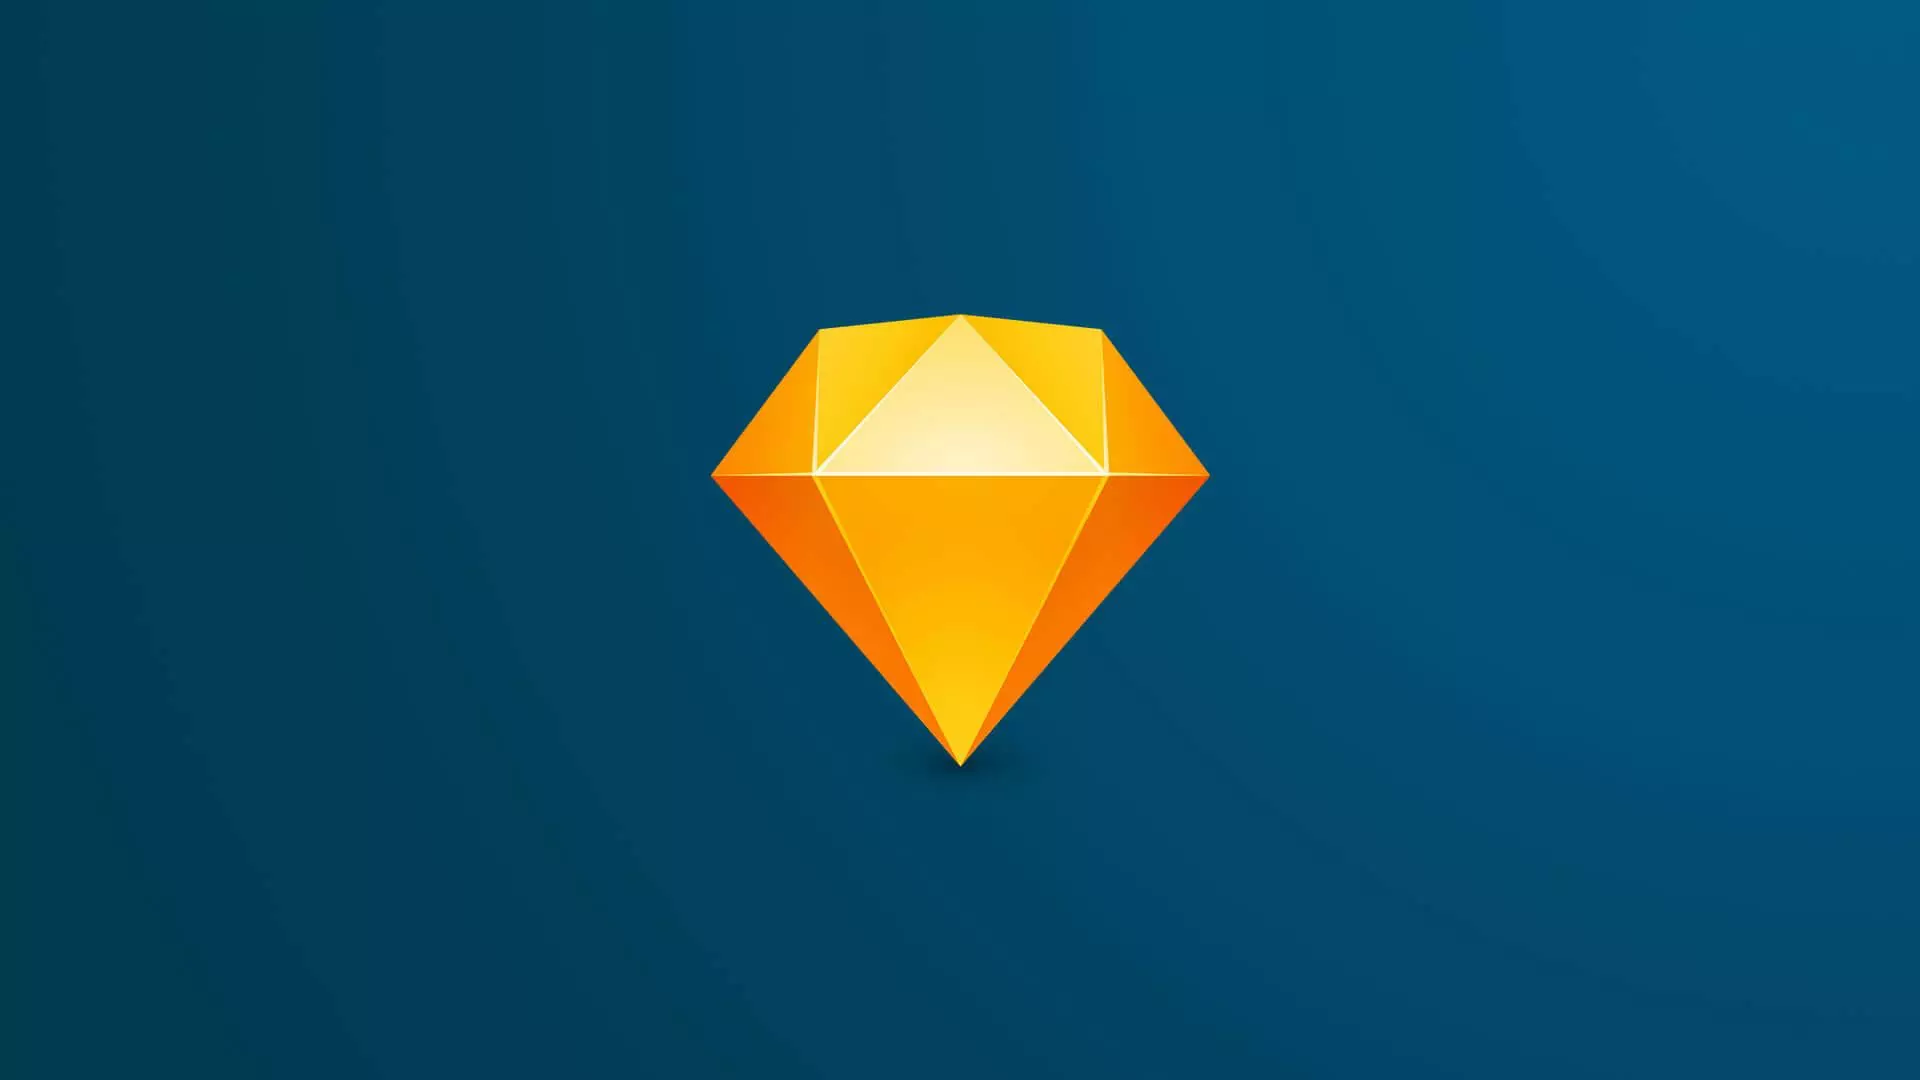 5 reasons why Sketch outshines Photoshop